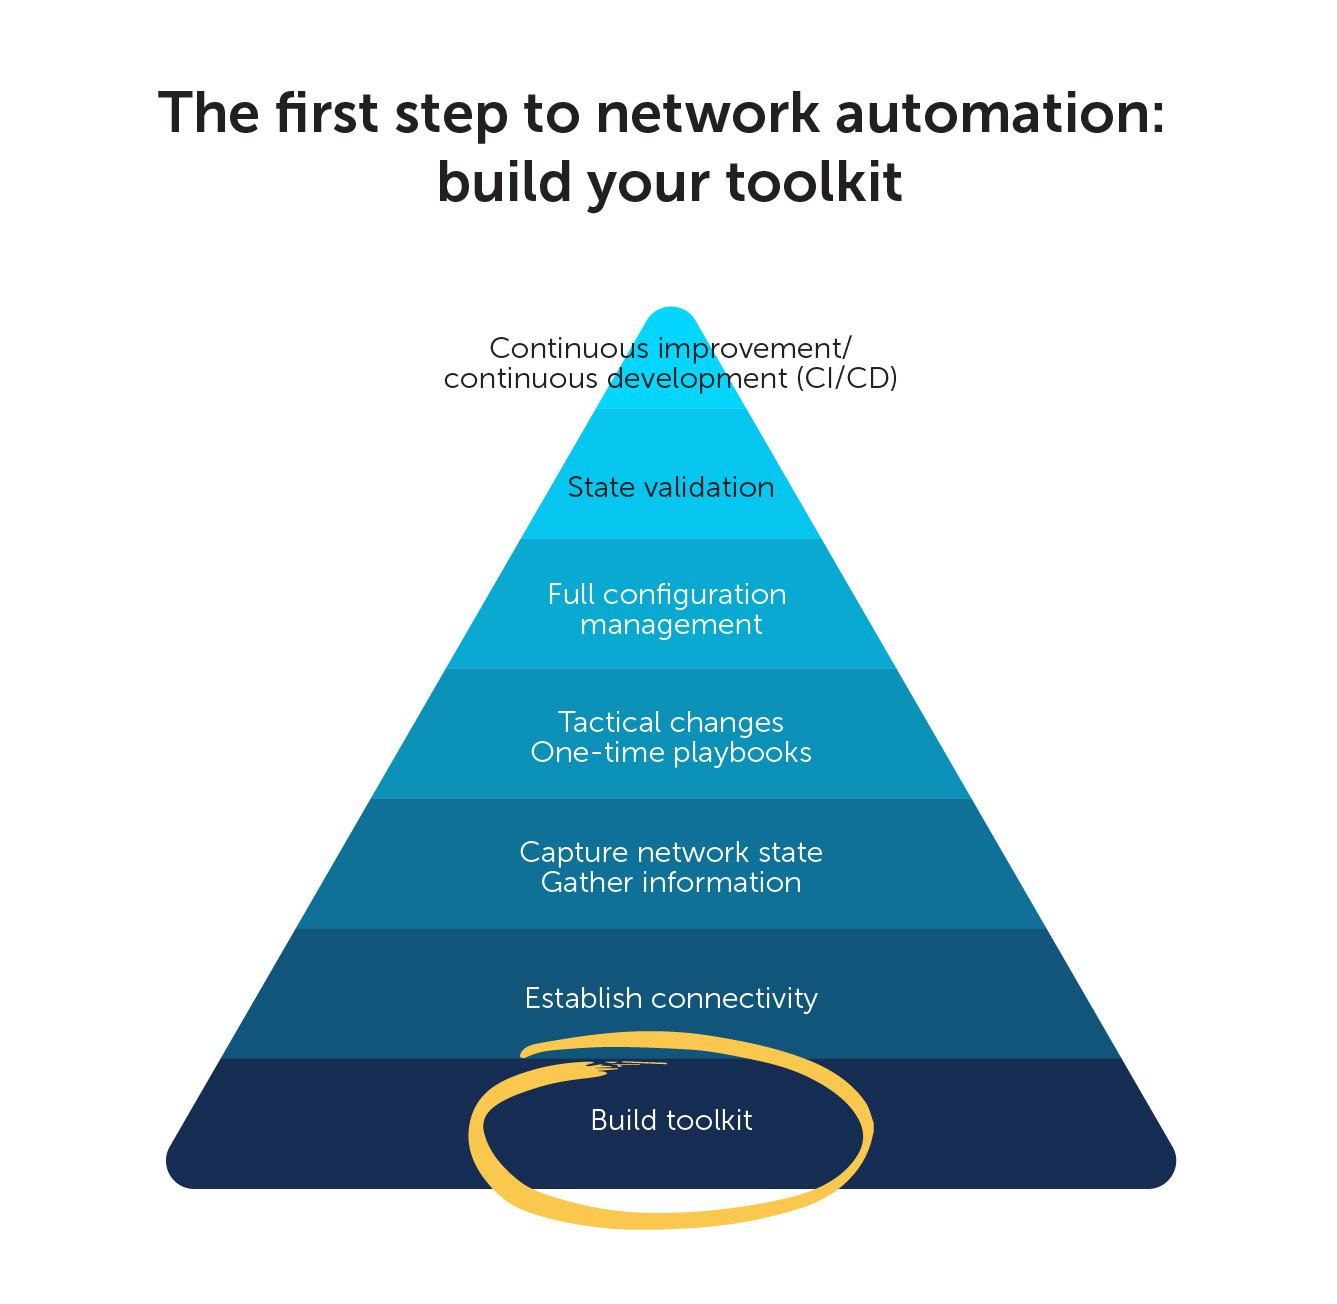 The first step in the network automation pyramid is to build your toolkit